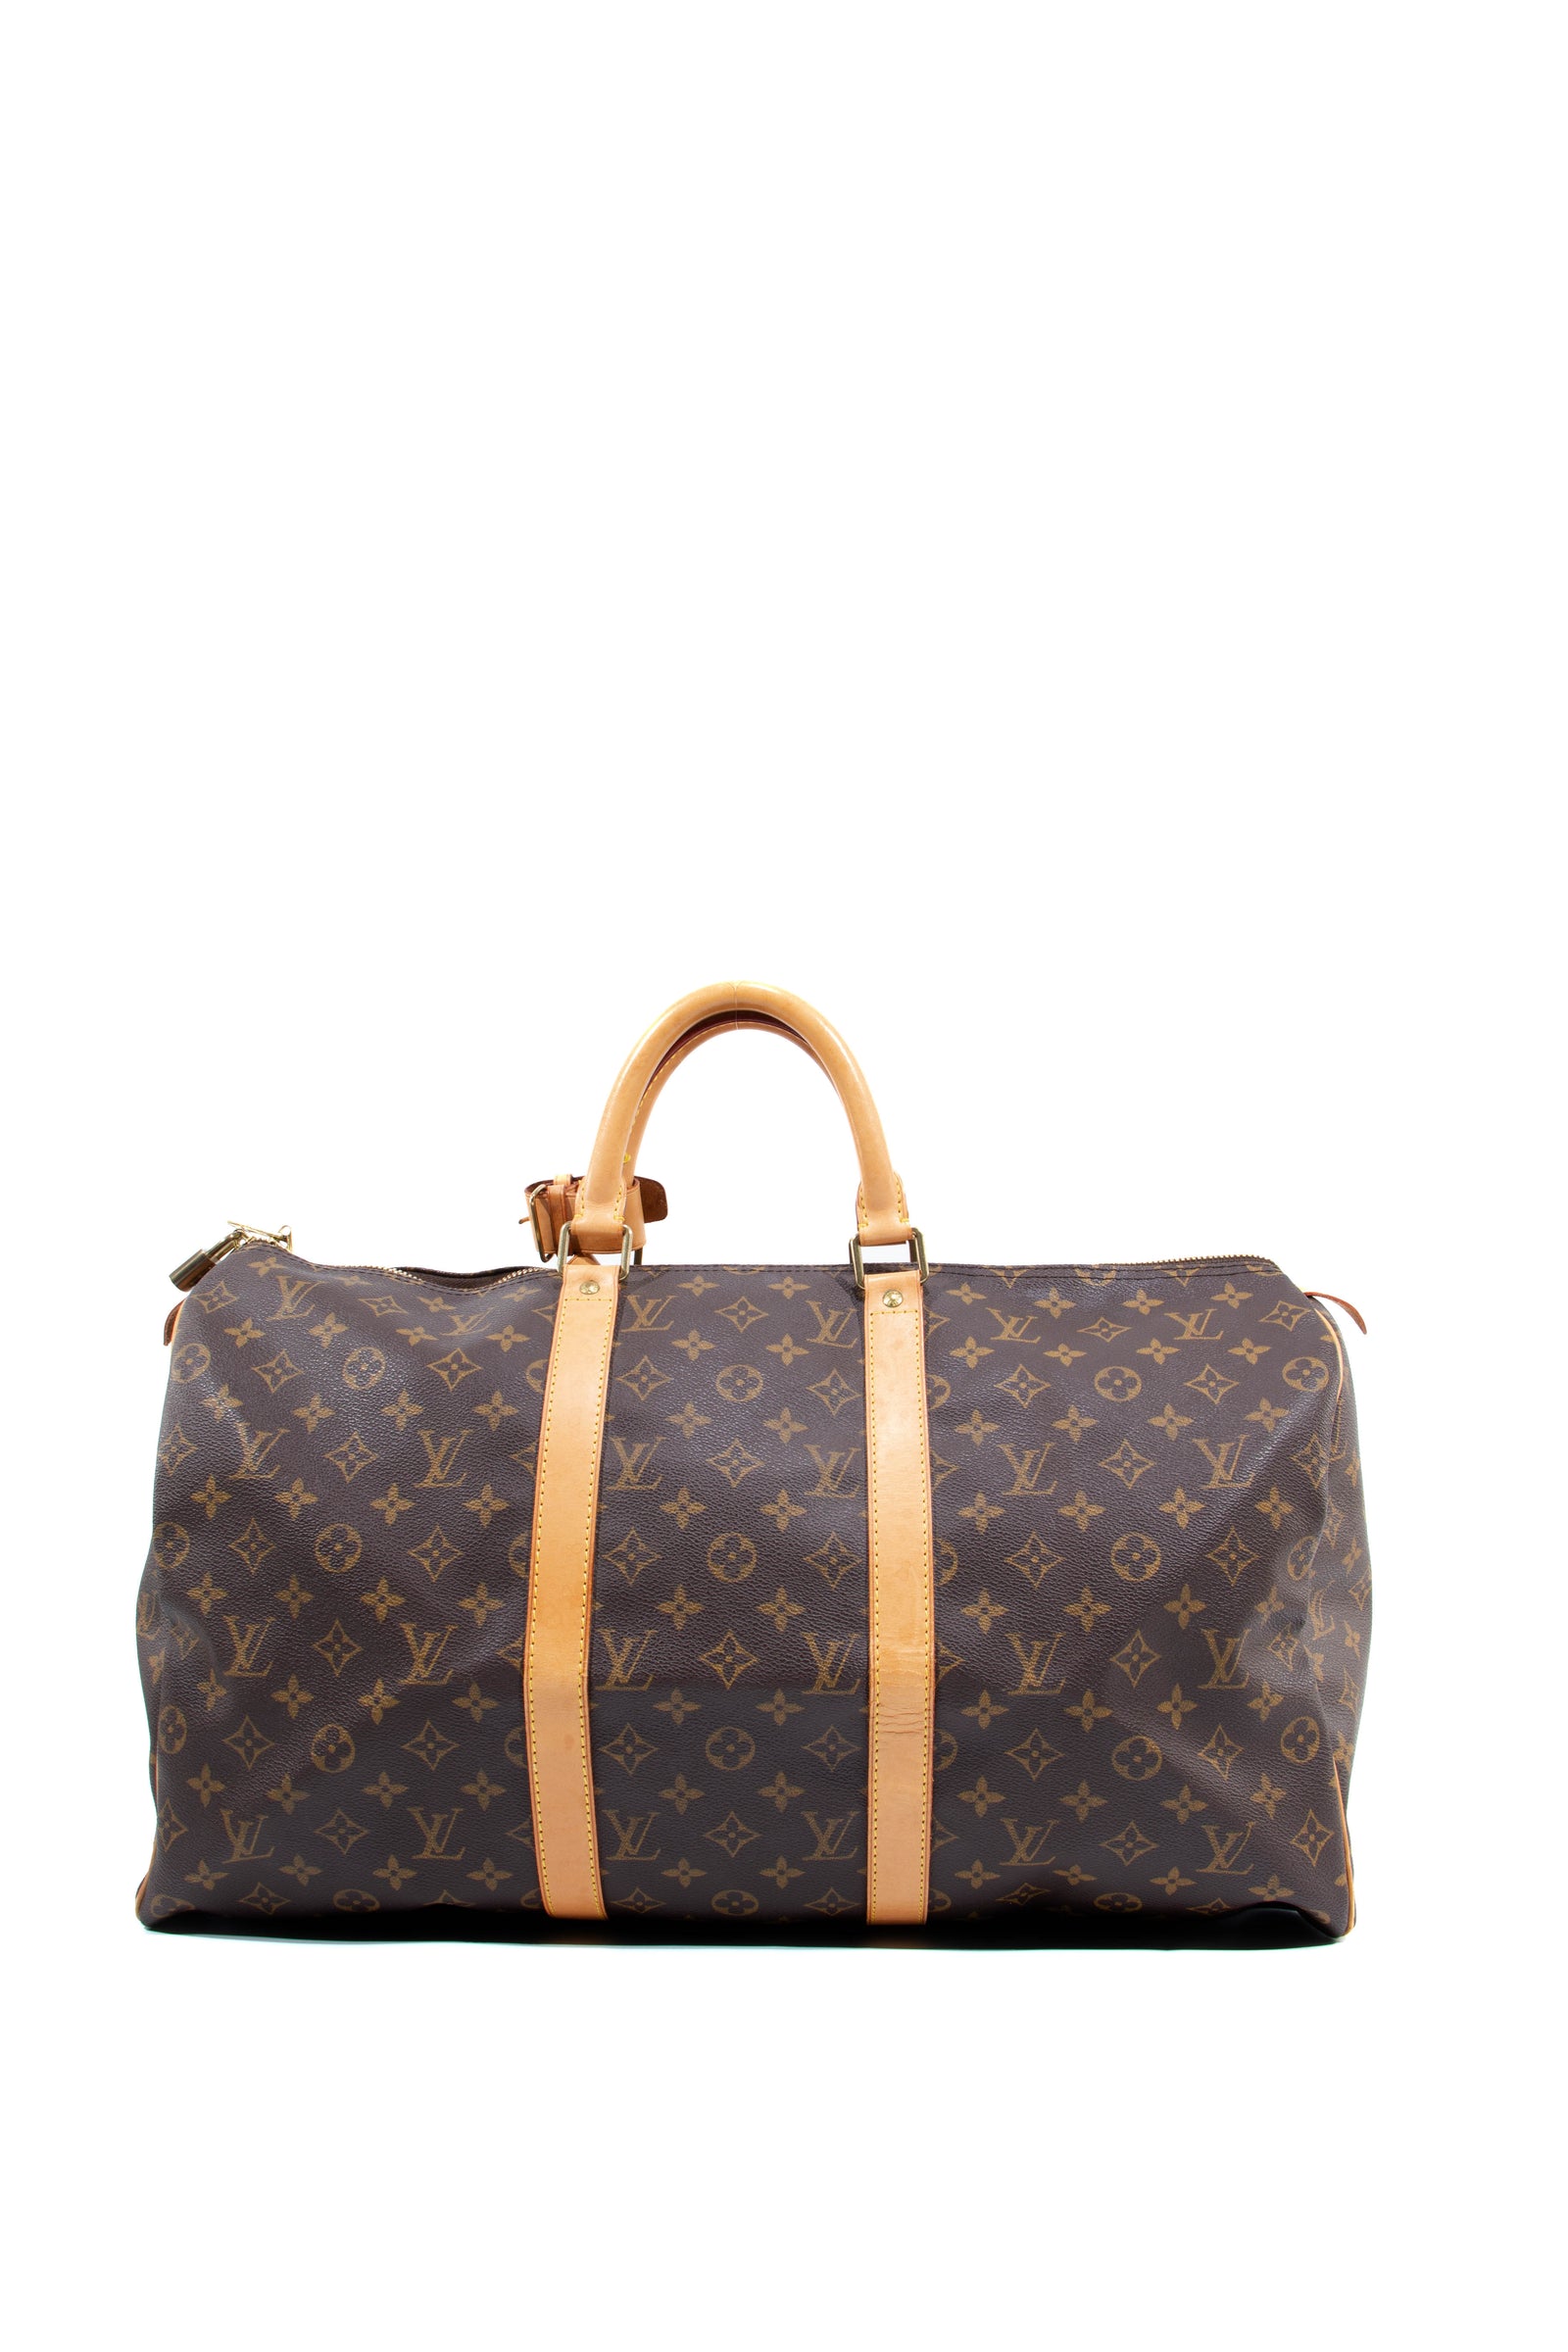 Louis Vuitton 2000 pre-owned Keepall 55 two-way bag, Brown